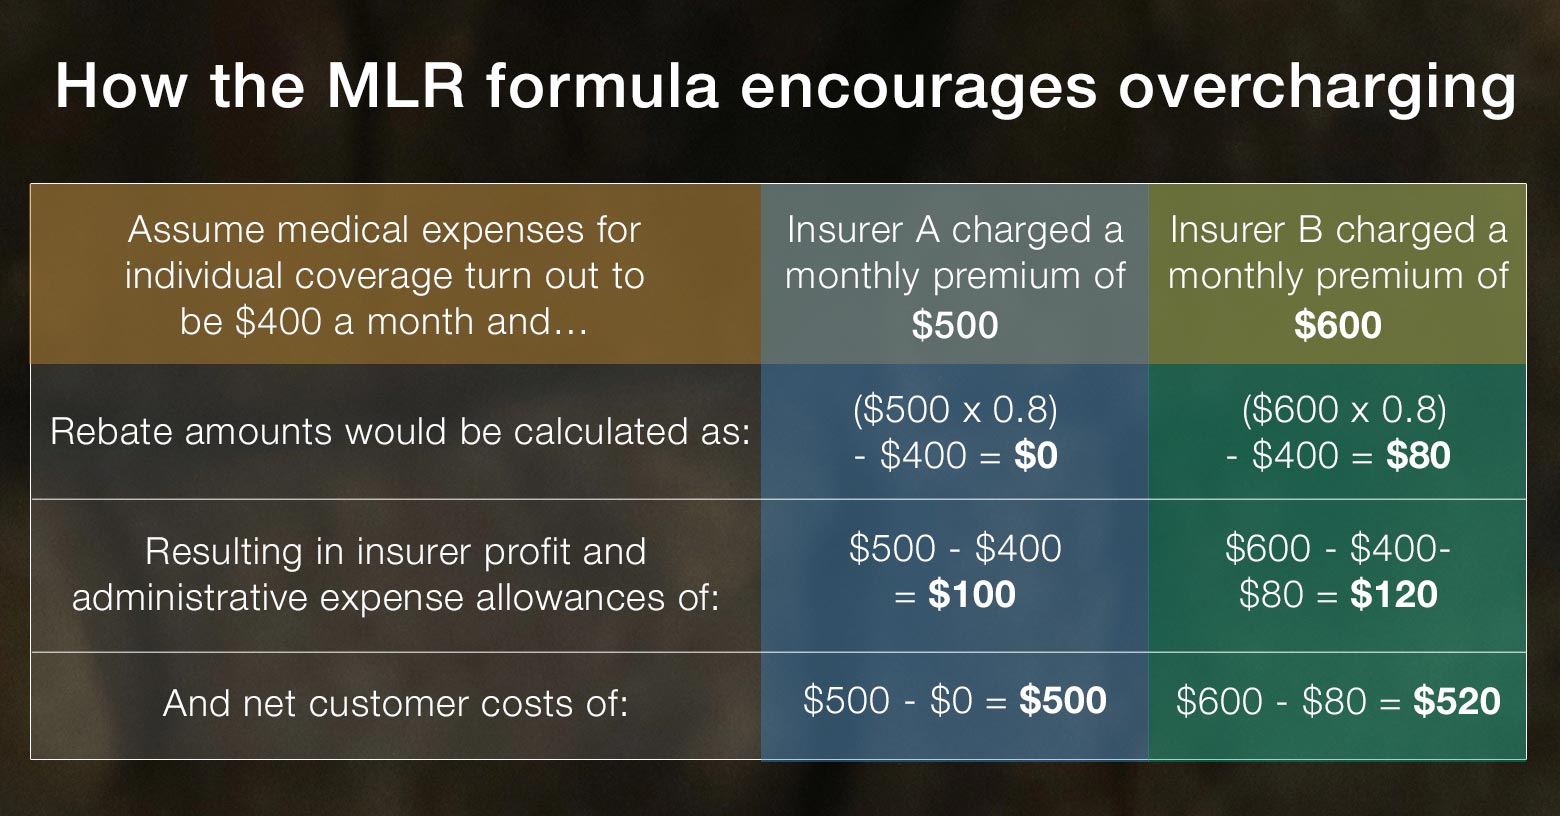 How the medical loss ratio formula encourages overcharging